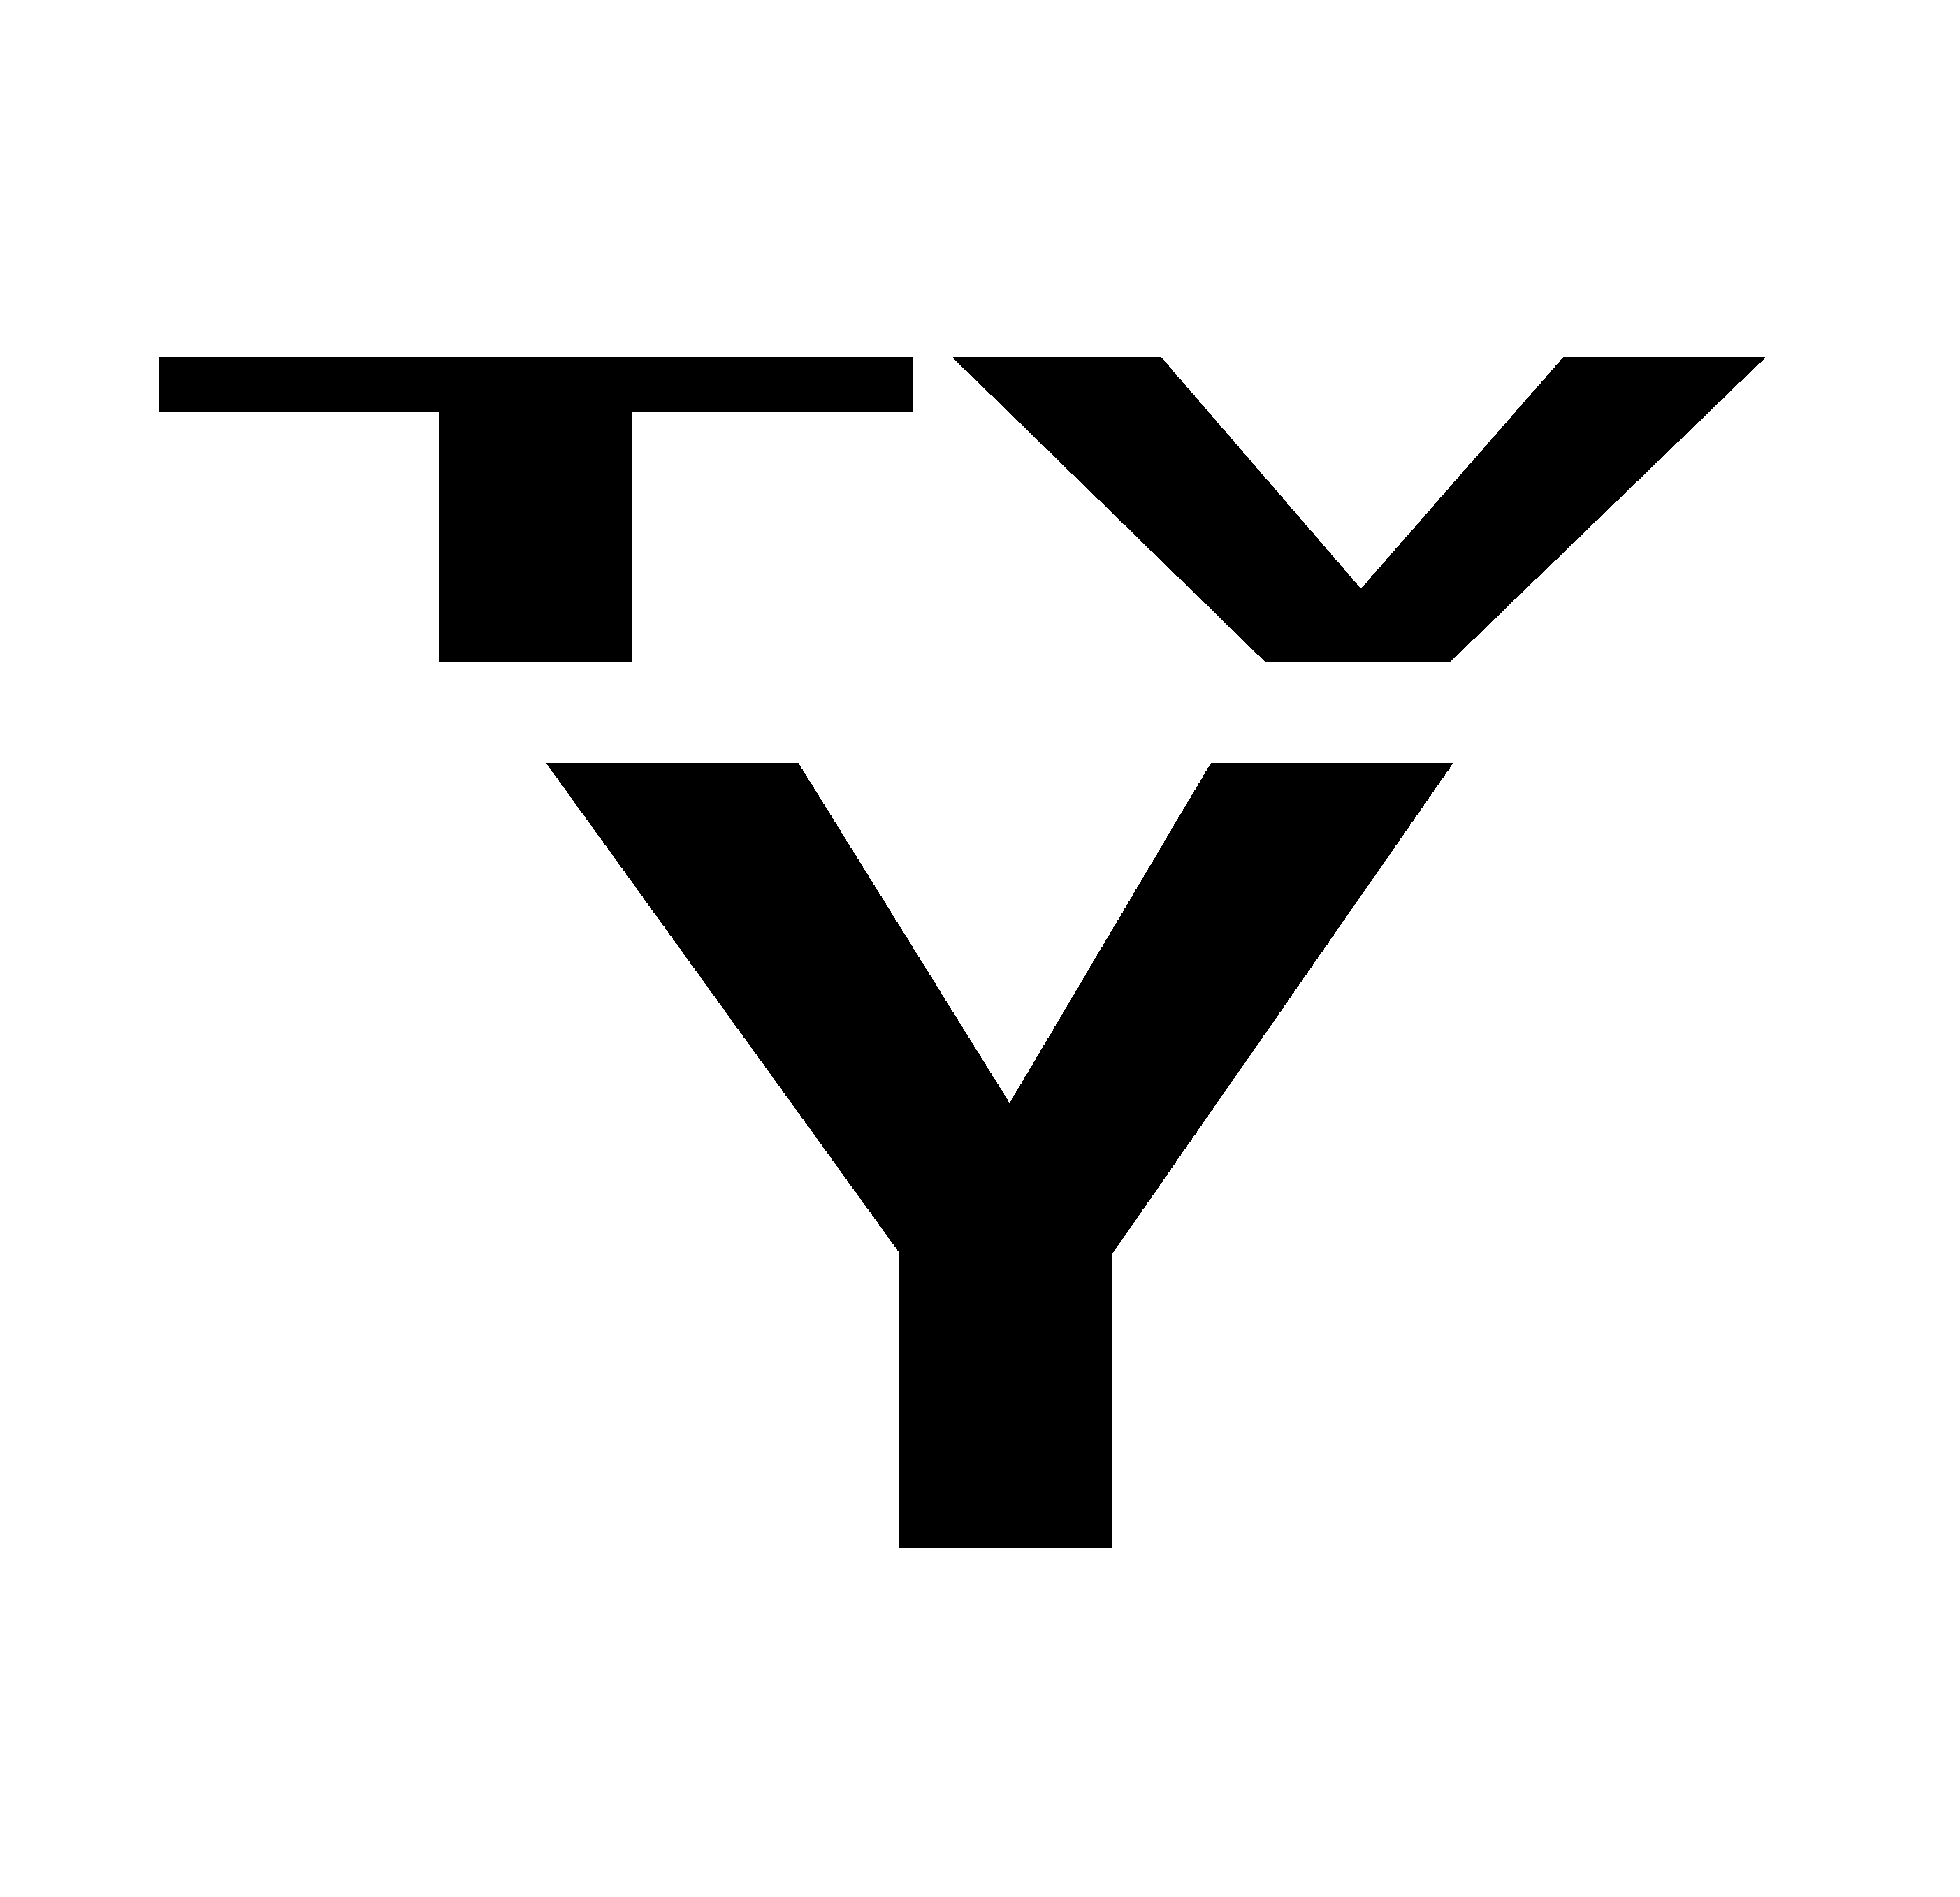 TV-Y7 Logo - File:White TV-Y icon.png - Wikimedia Commons